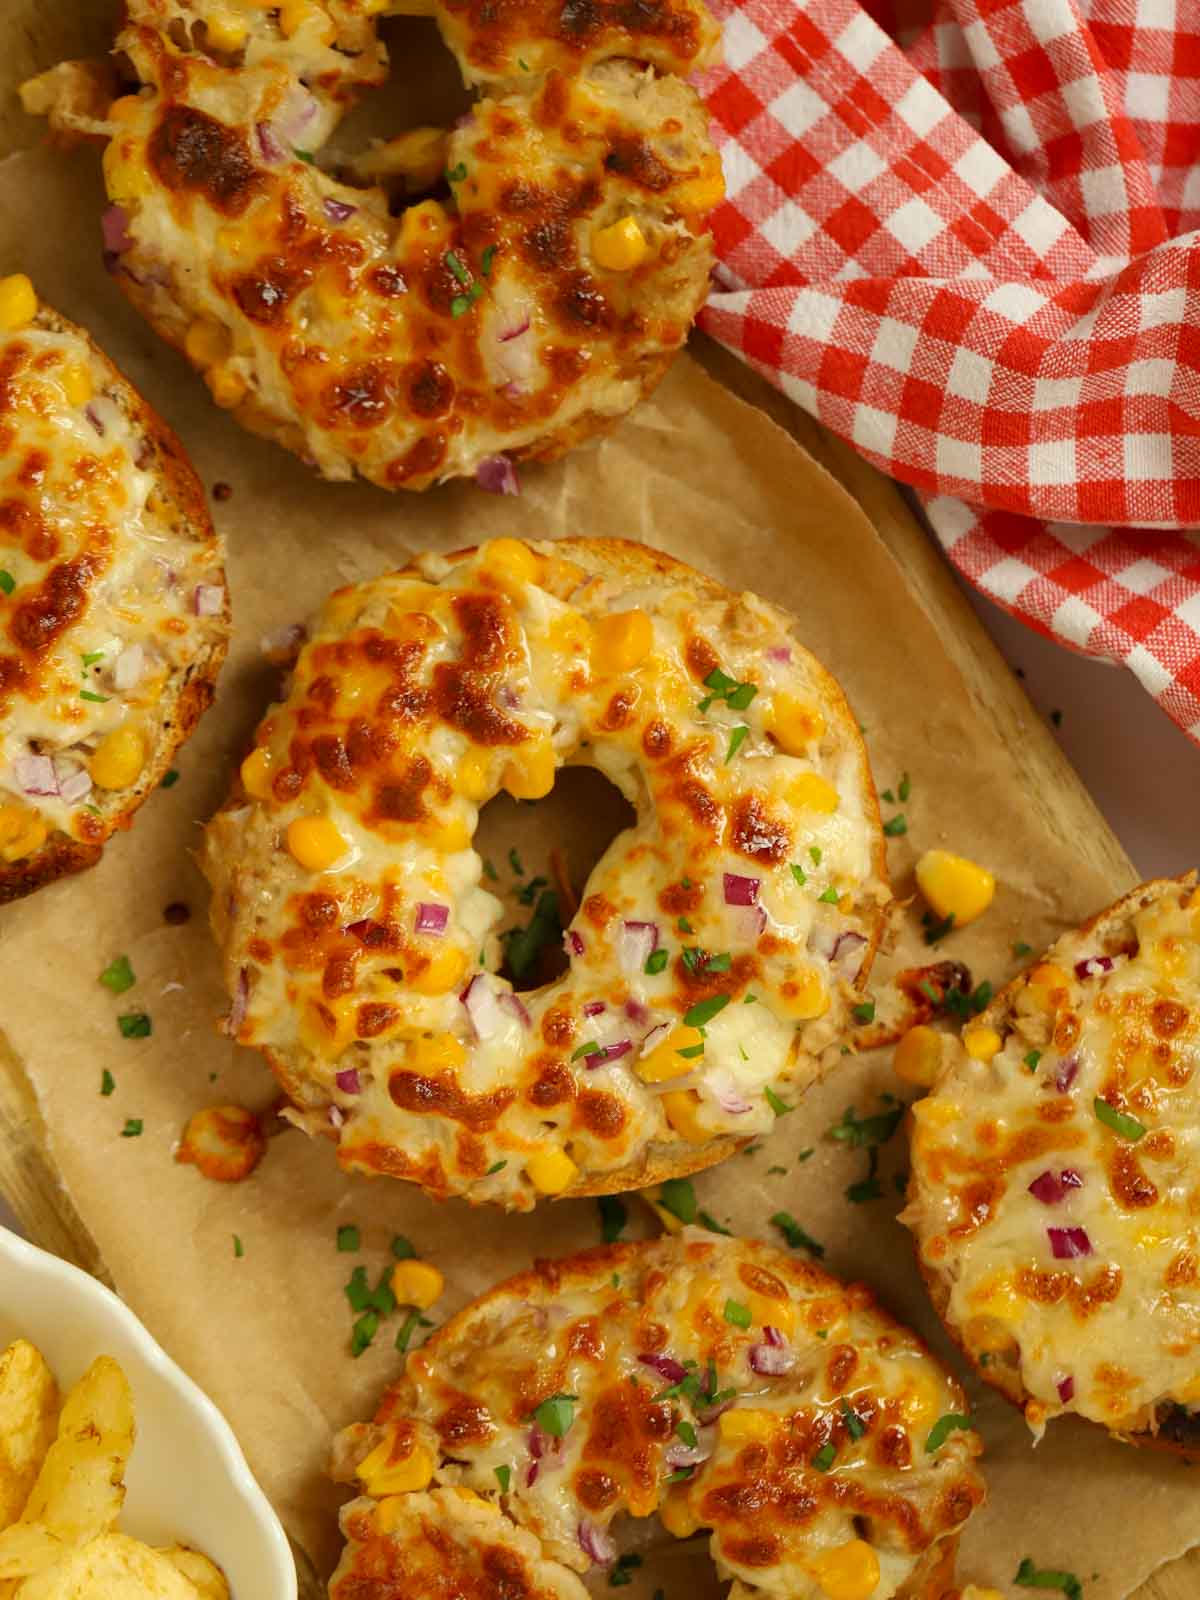 Tuna melt bagel with red onion and sweetcorn.